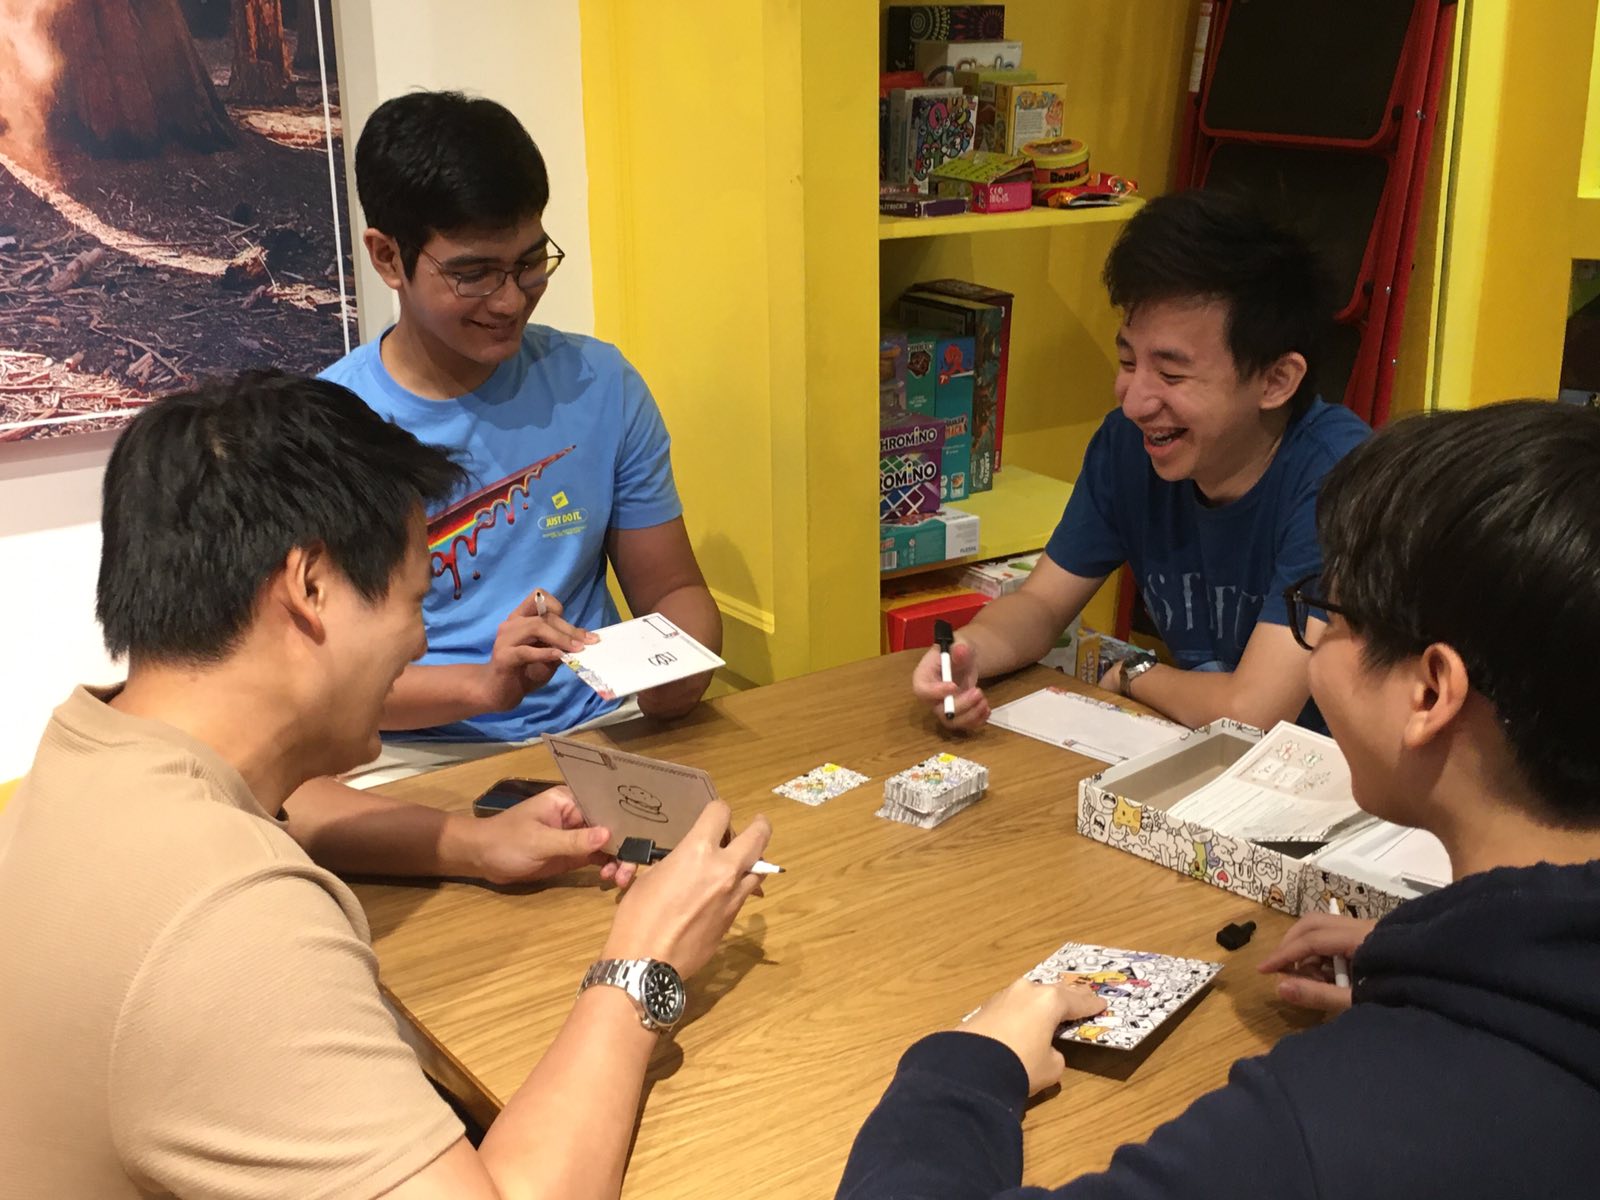 Quick Tips on How to Host a Board Game Night - Gaming Library